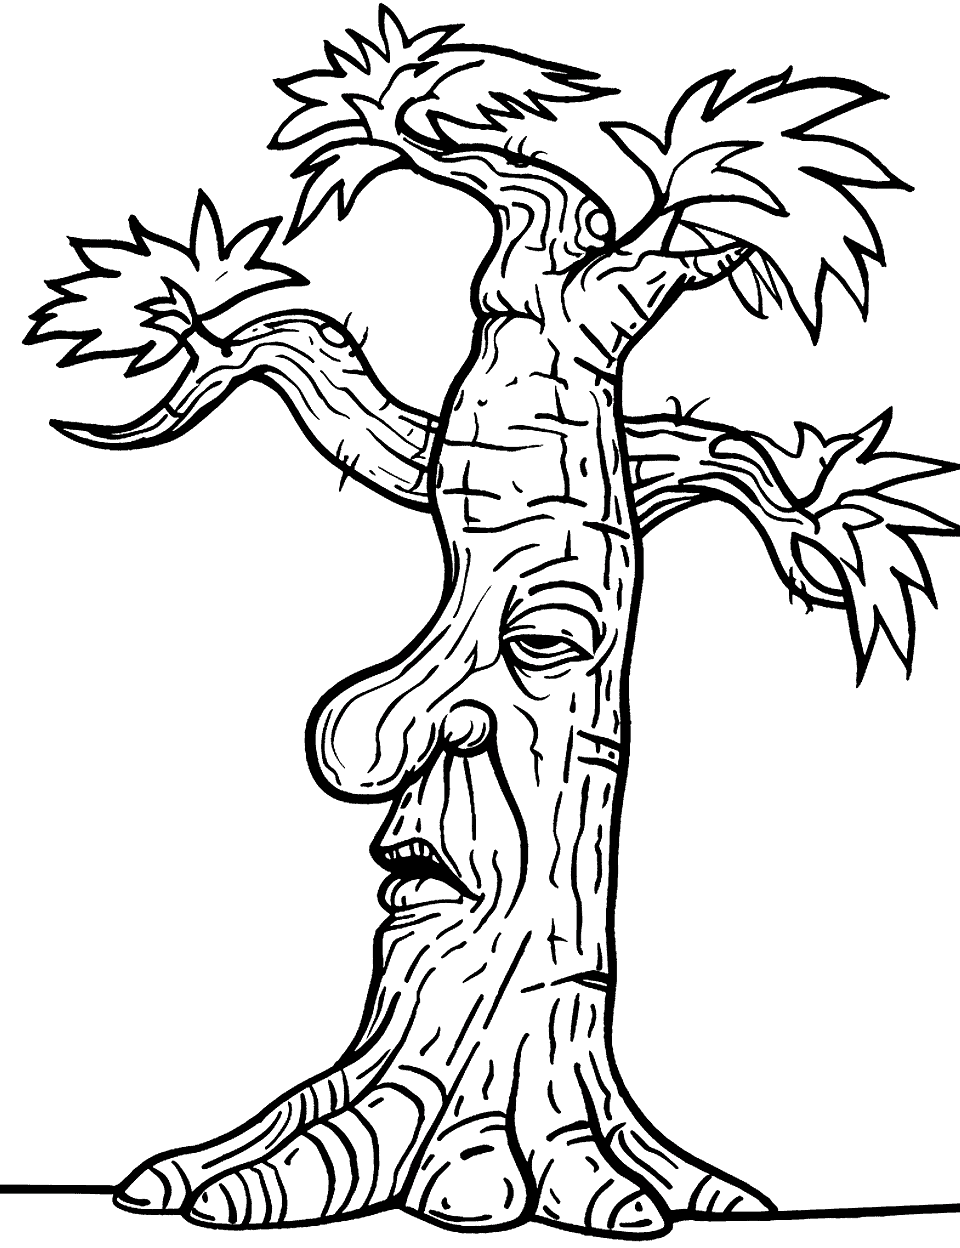 Old Wise Tree Coloring Page - An ancient tree with a wise, expressive face on its trunk.